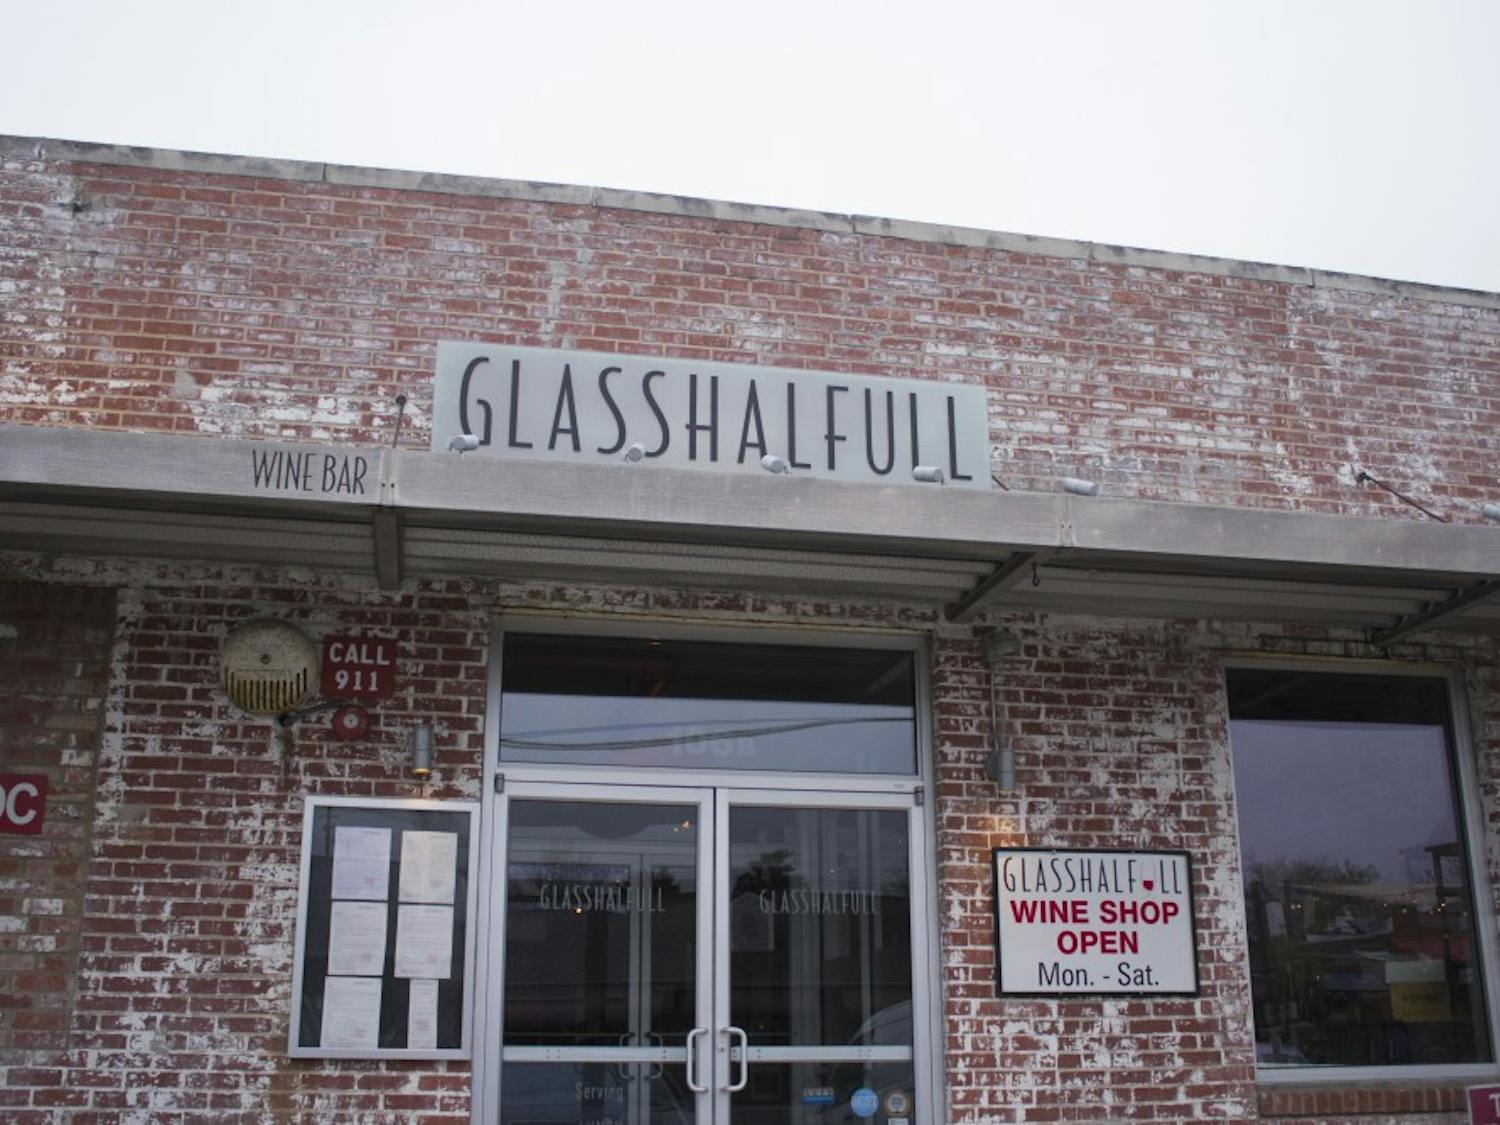 Glasshalfull, a restaurant and wine shop in Carrboro, NC, donates portions of profits on Tuesday and Wednesday nights.